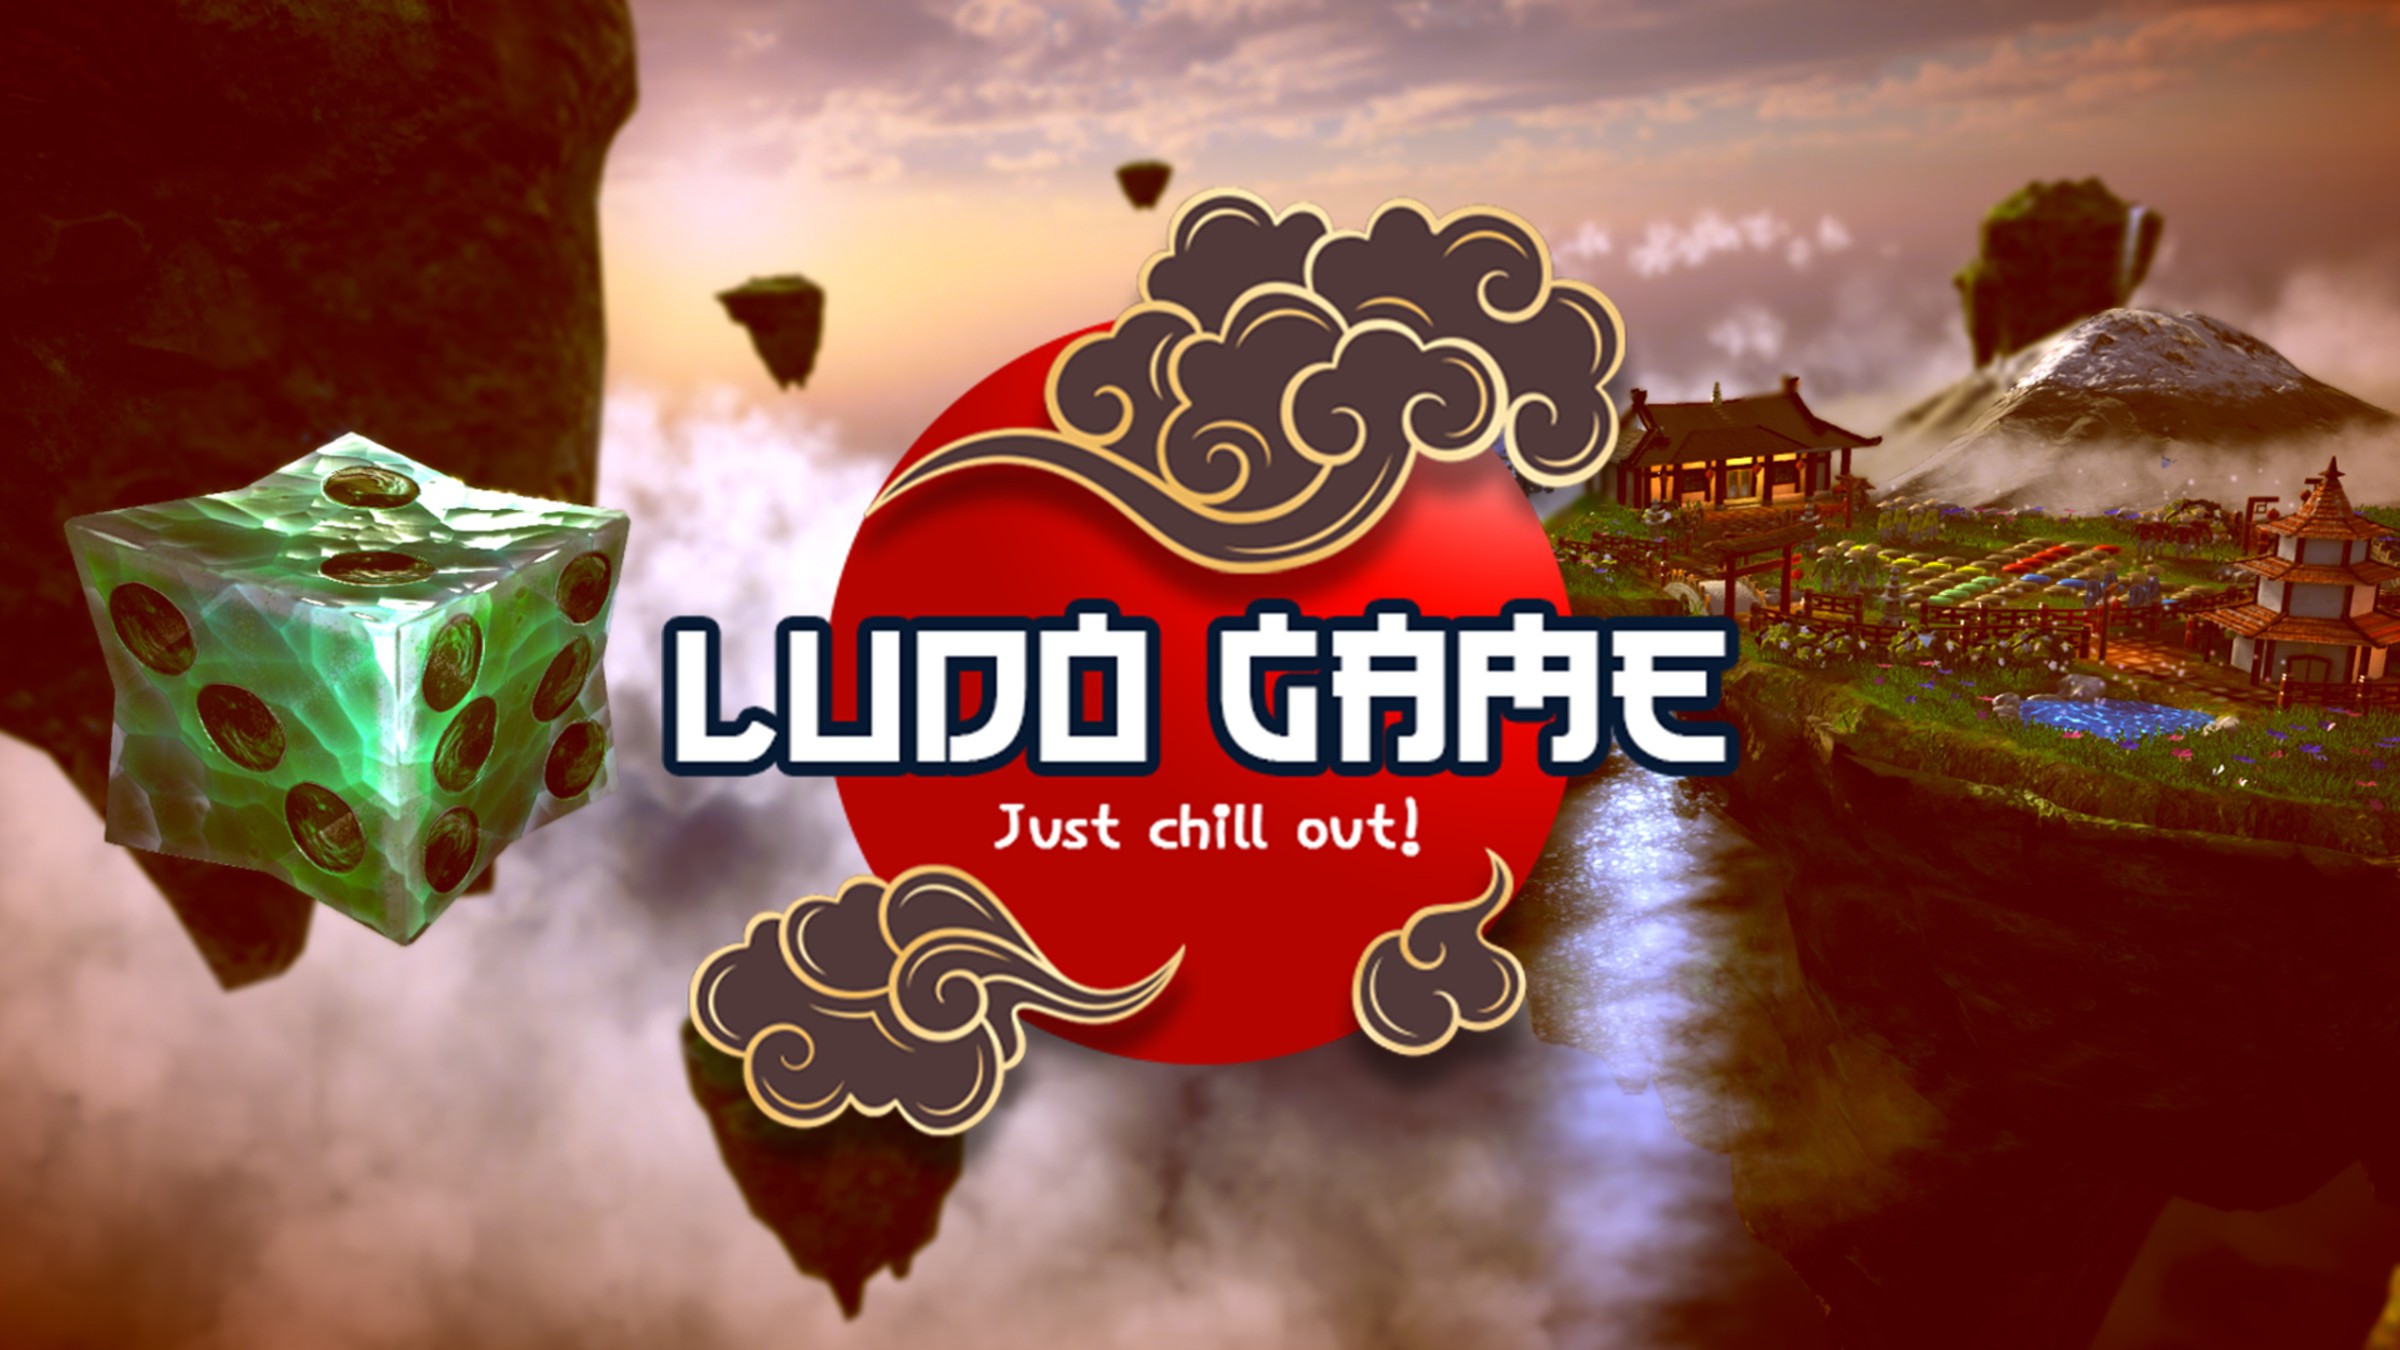 Play Ludo Hero Online - Free Browser Games